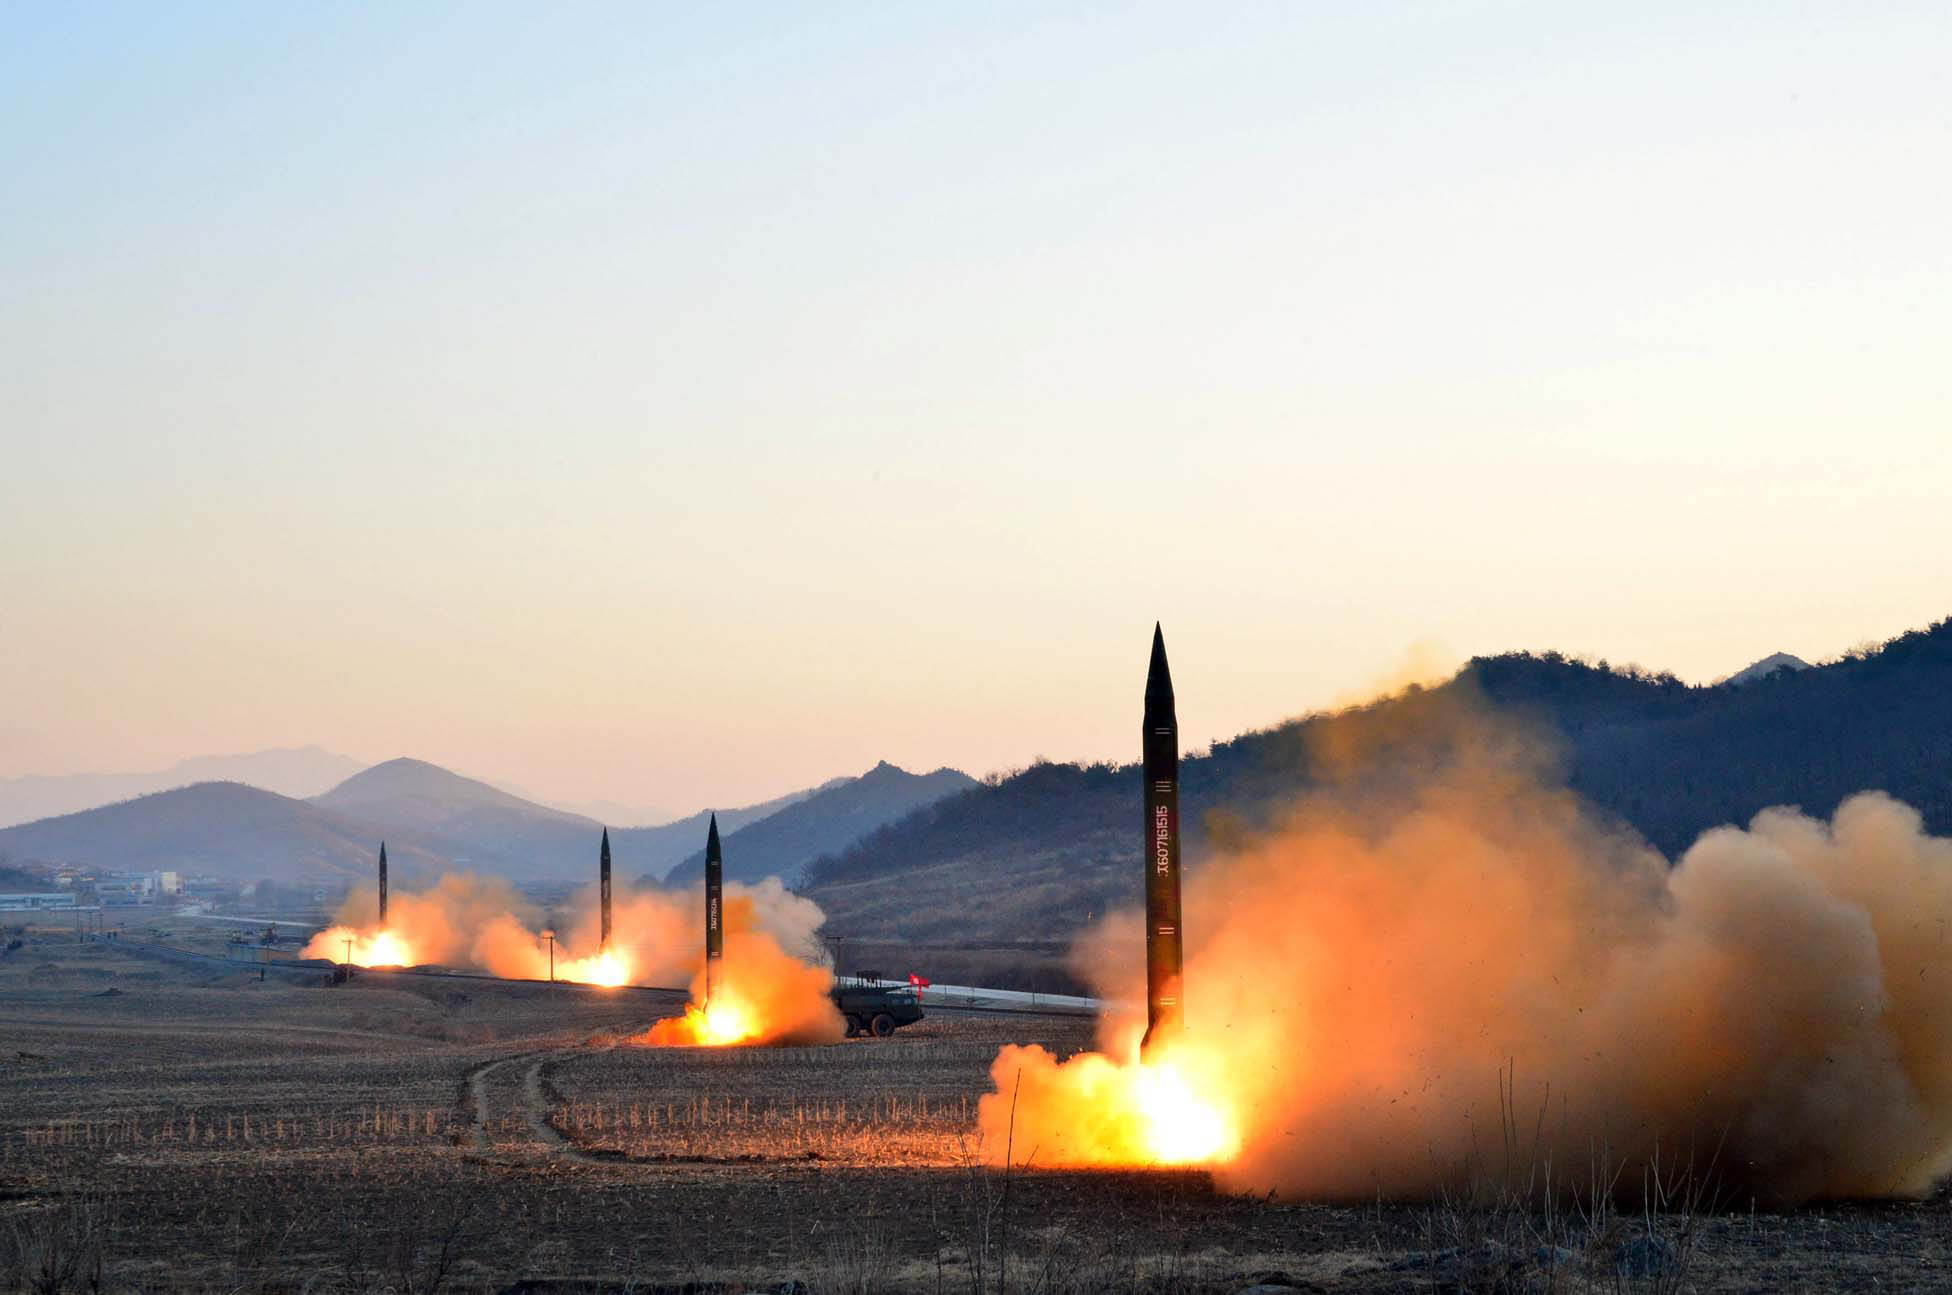 This undated picture released by North Korea's Korean Central News Agency (KCNA) via KNS on March 7, 2017 shows the launch of four ballistic missiles by the Korean People's Army (KPA) during a military drill at an undisclosed location in North Korea. (AFP/Getty Images)